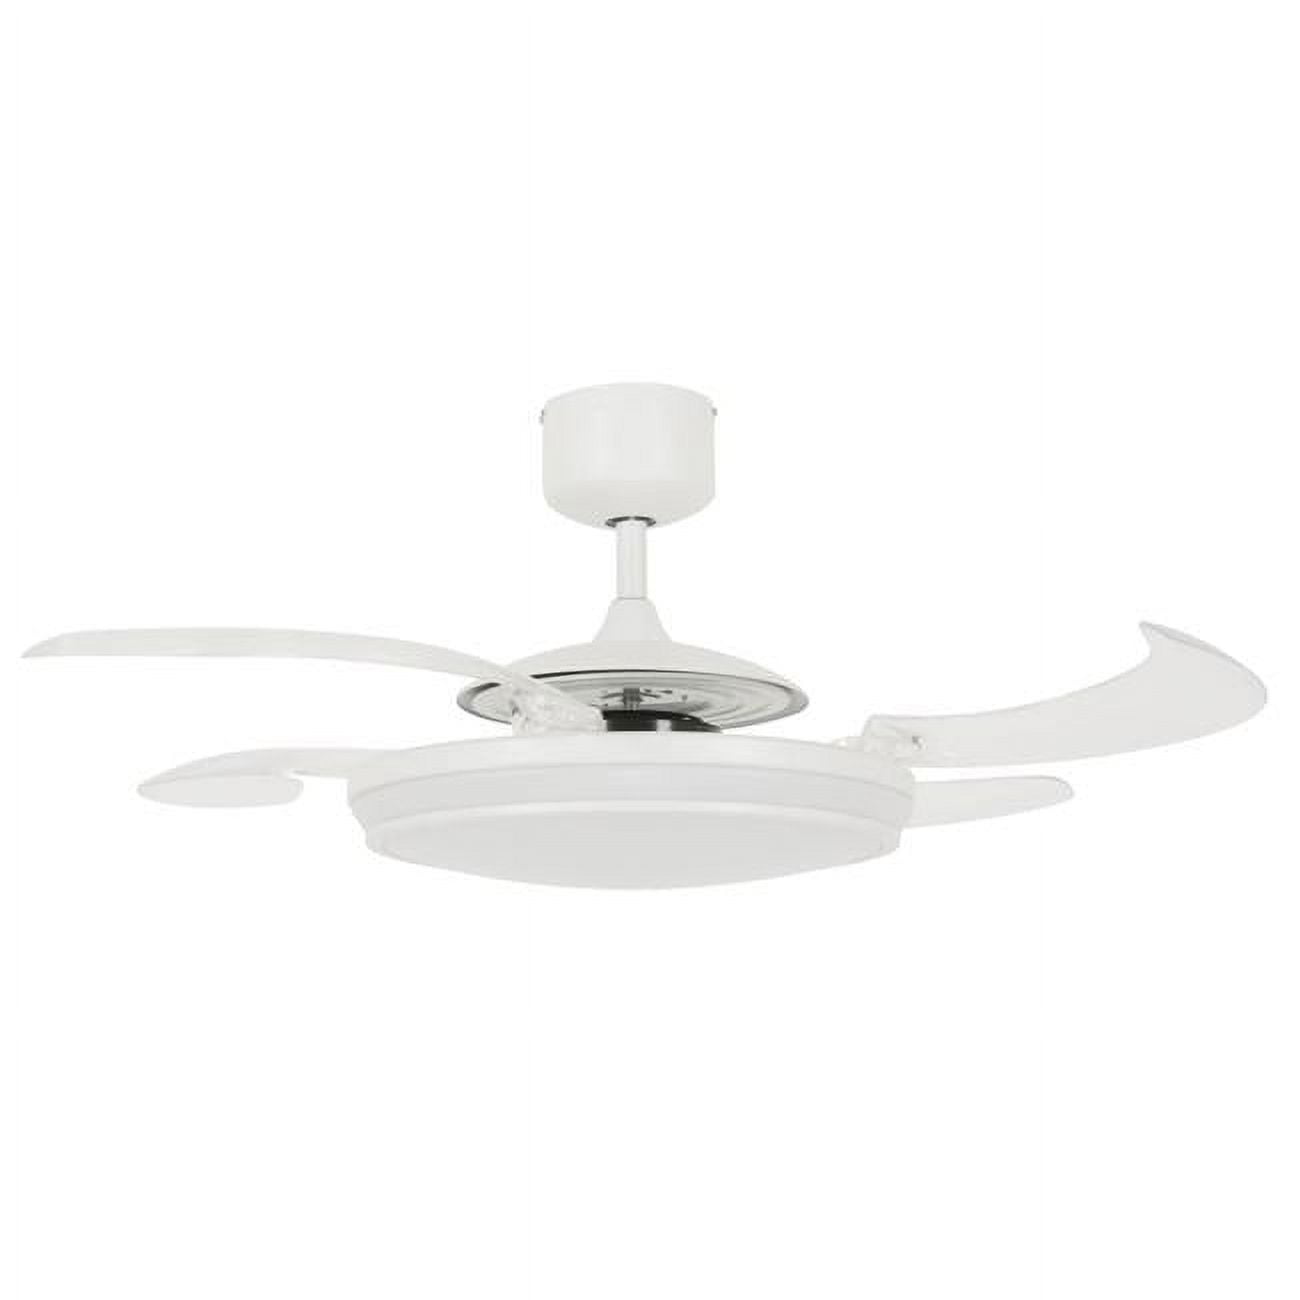 Picture of Fanaway 21103501 EVO 1 White LED Lighting with Remote Ceiling Fan